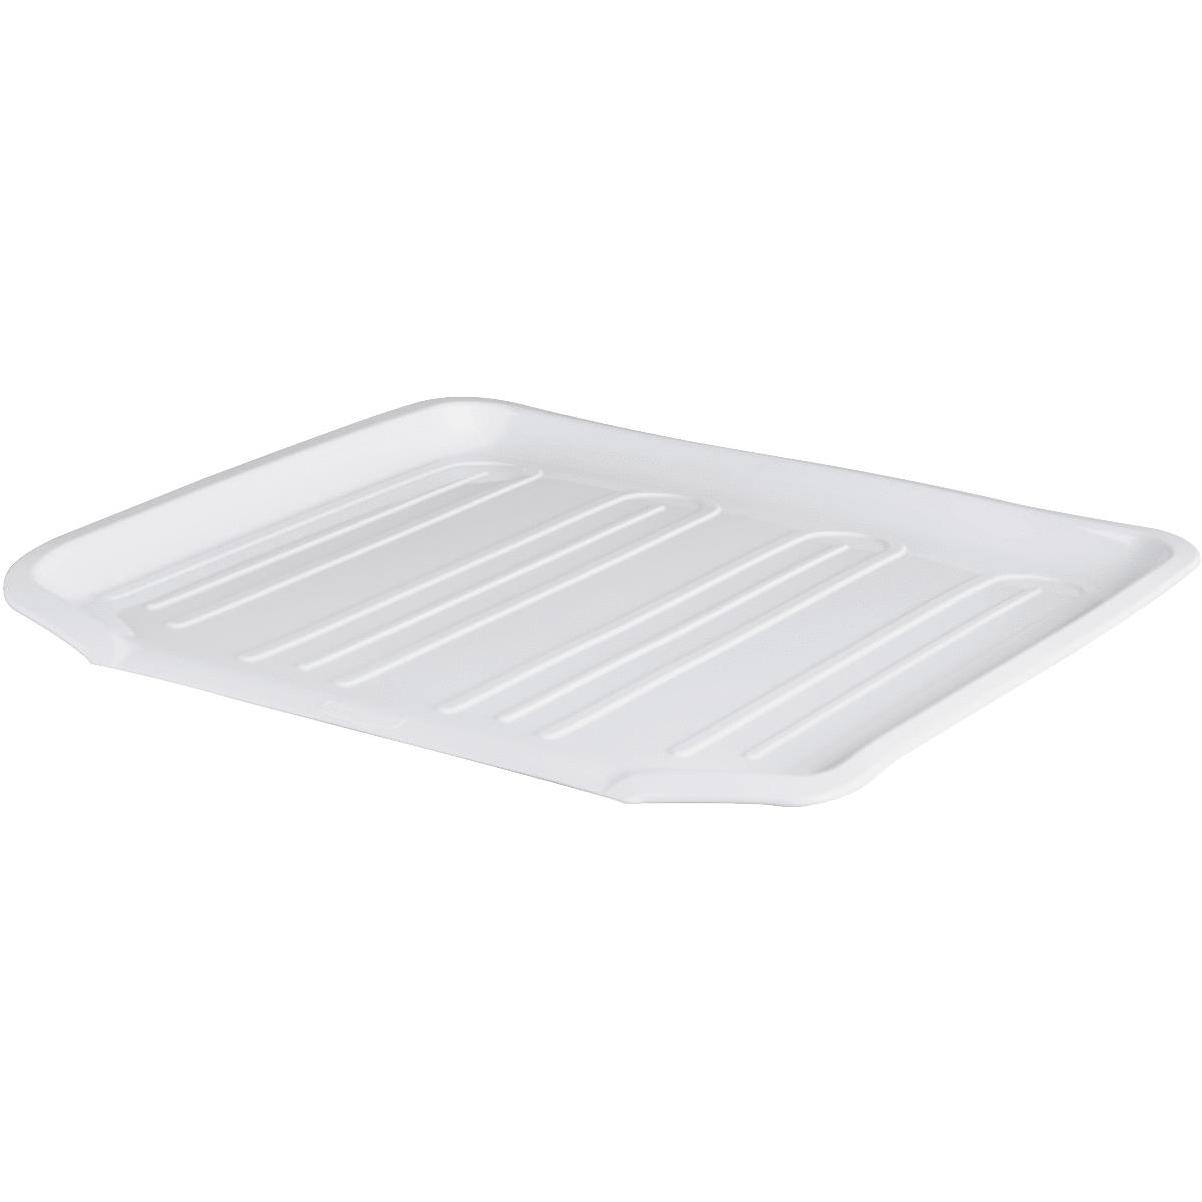 Rubbermaid Sloped Drainer Tray 